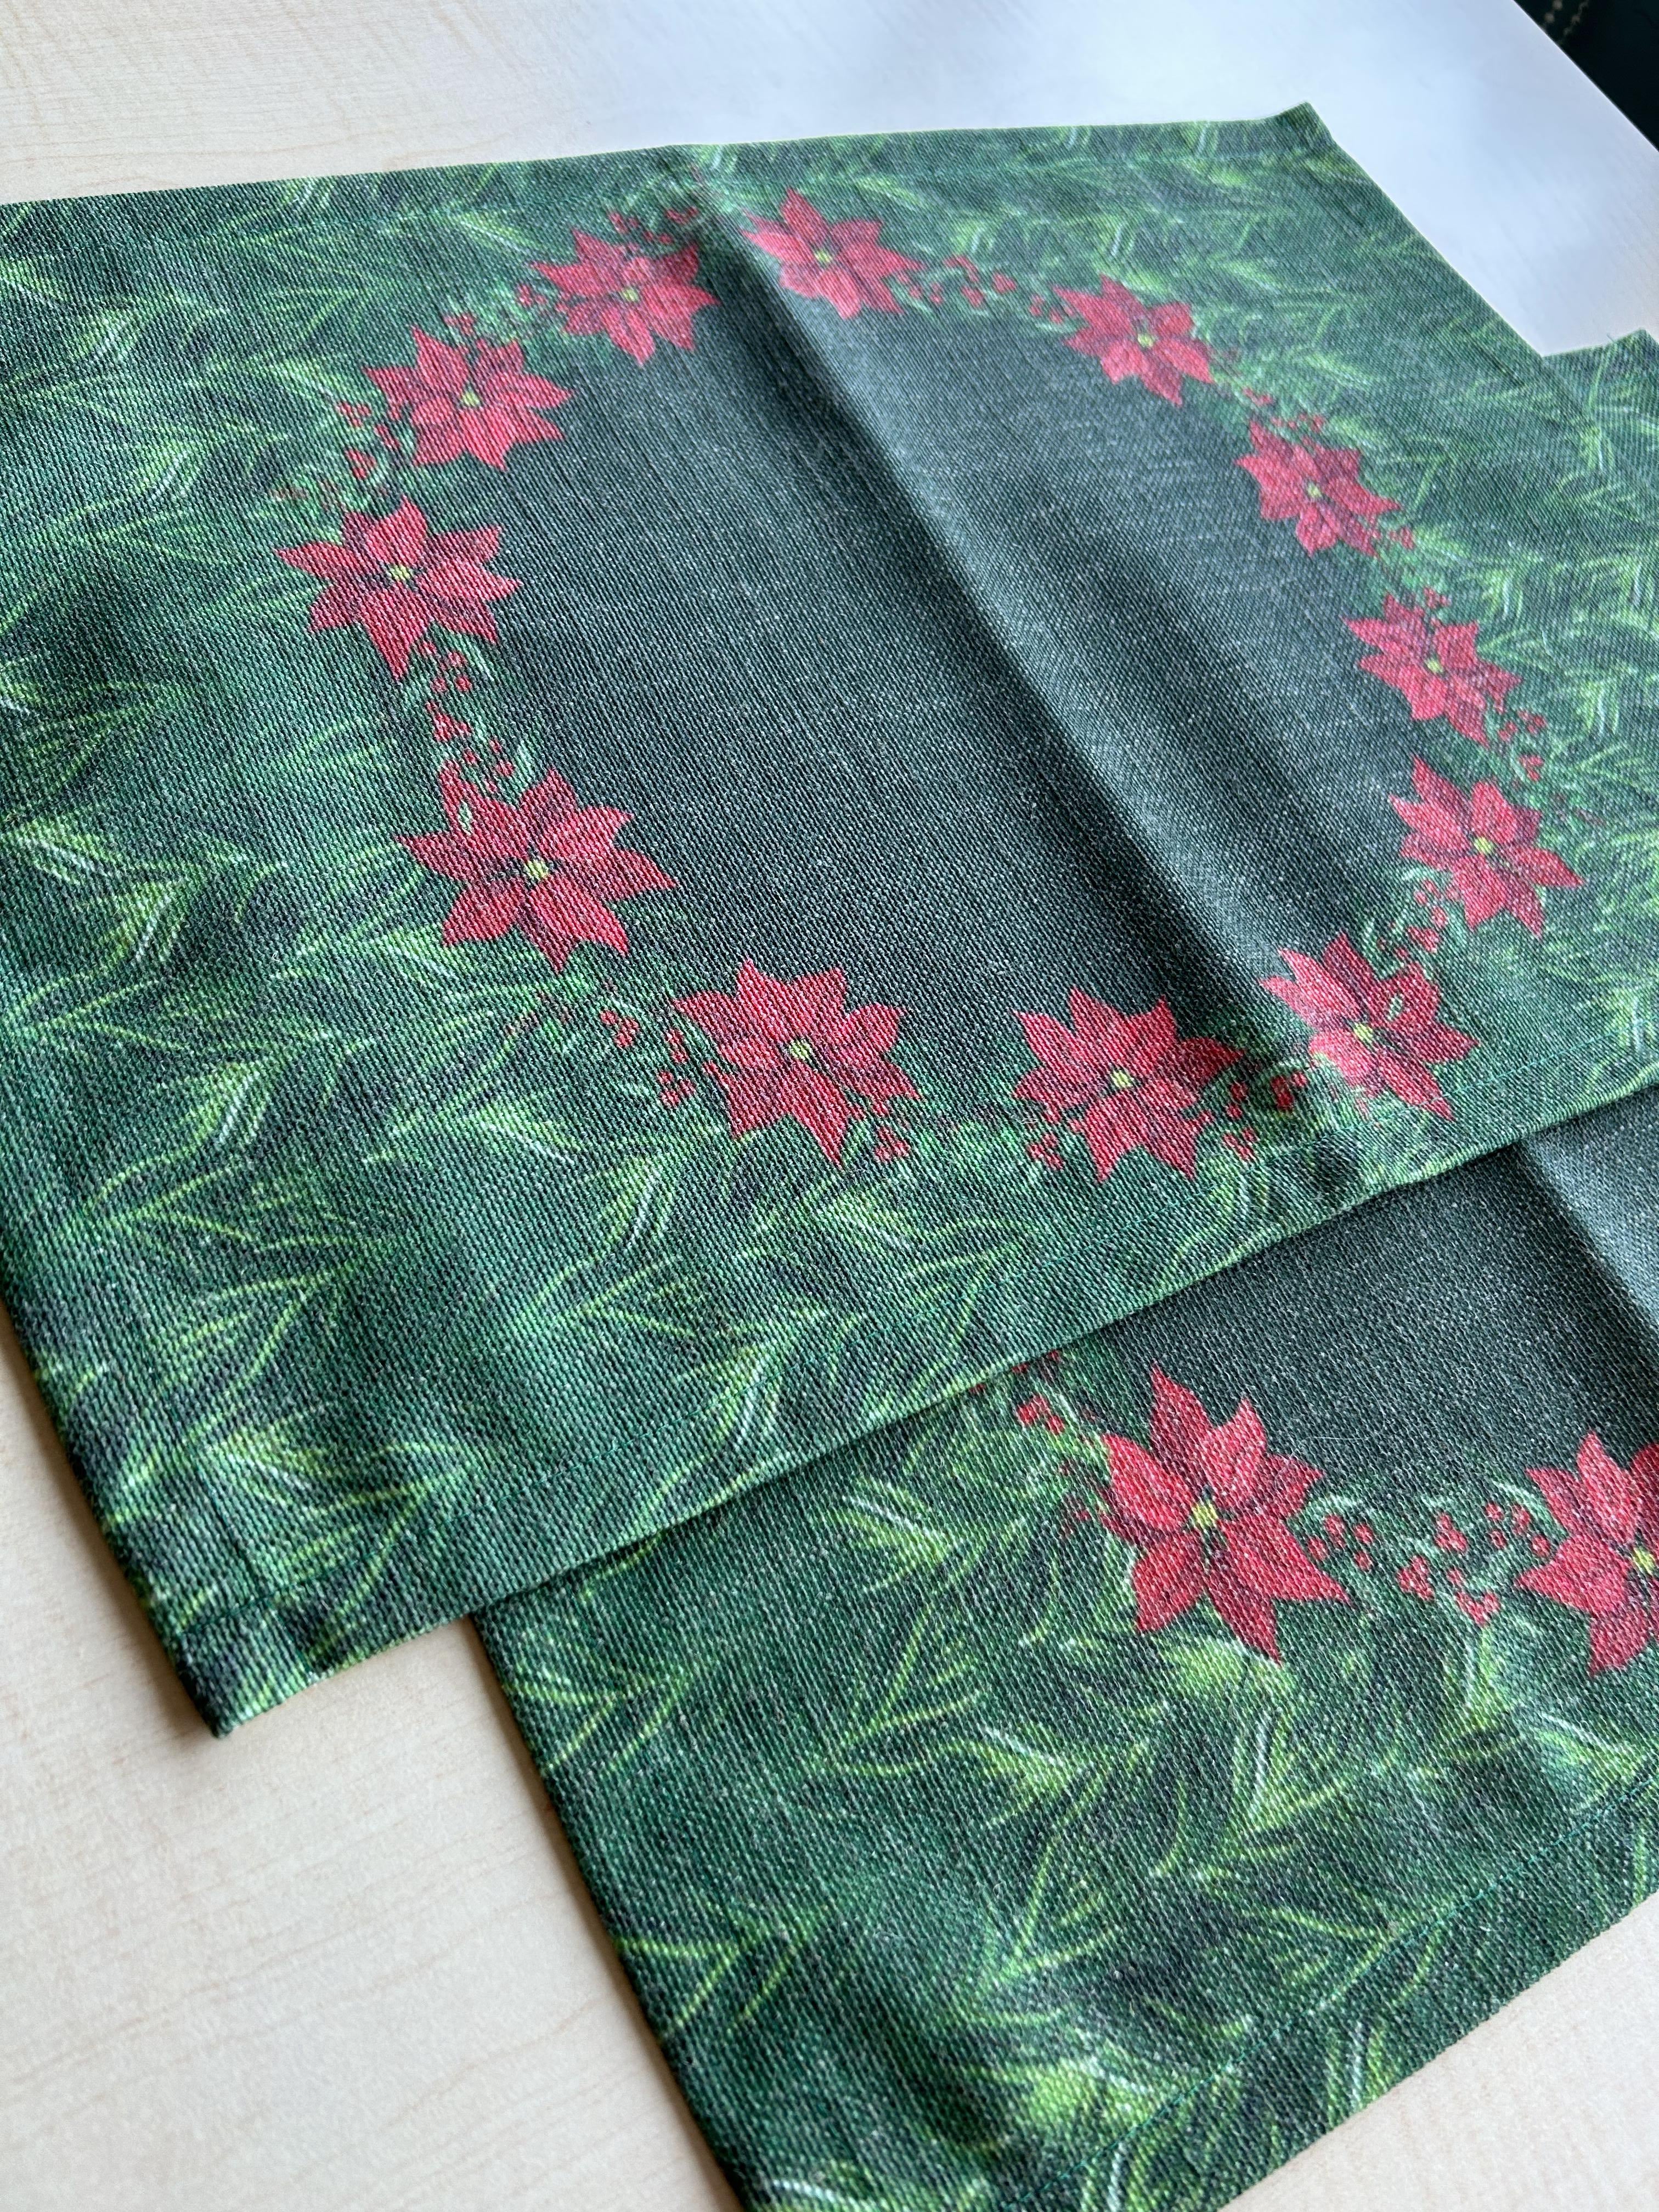 Holiday Themed Poinsettia Flower Pattern Placemat Set of 2, Rectangle, 13" x 19" - Wear Sierra